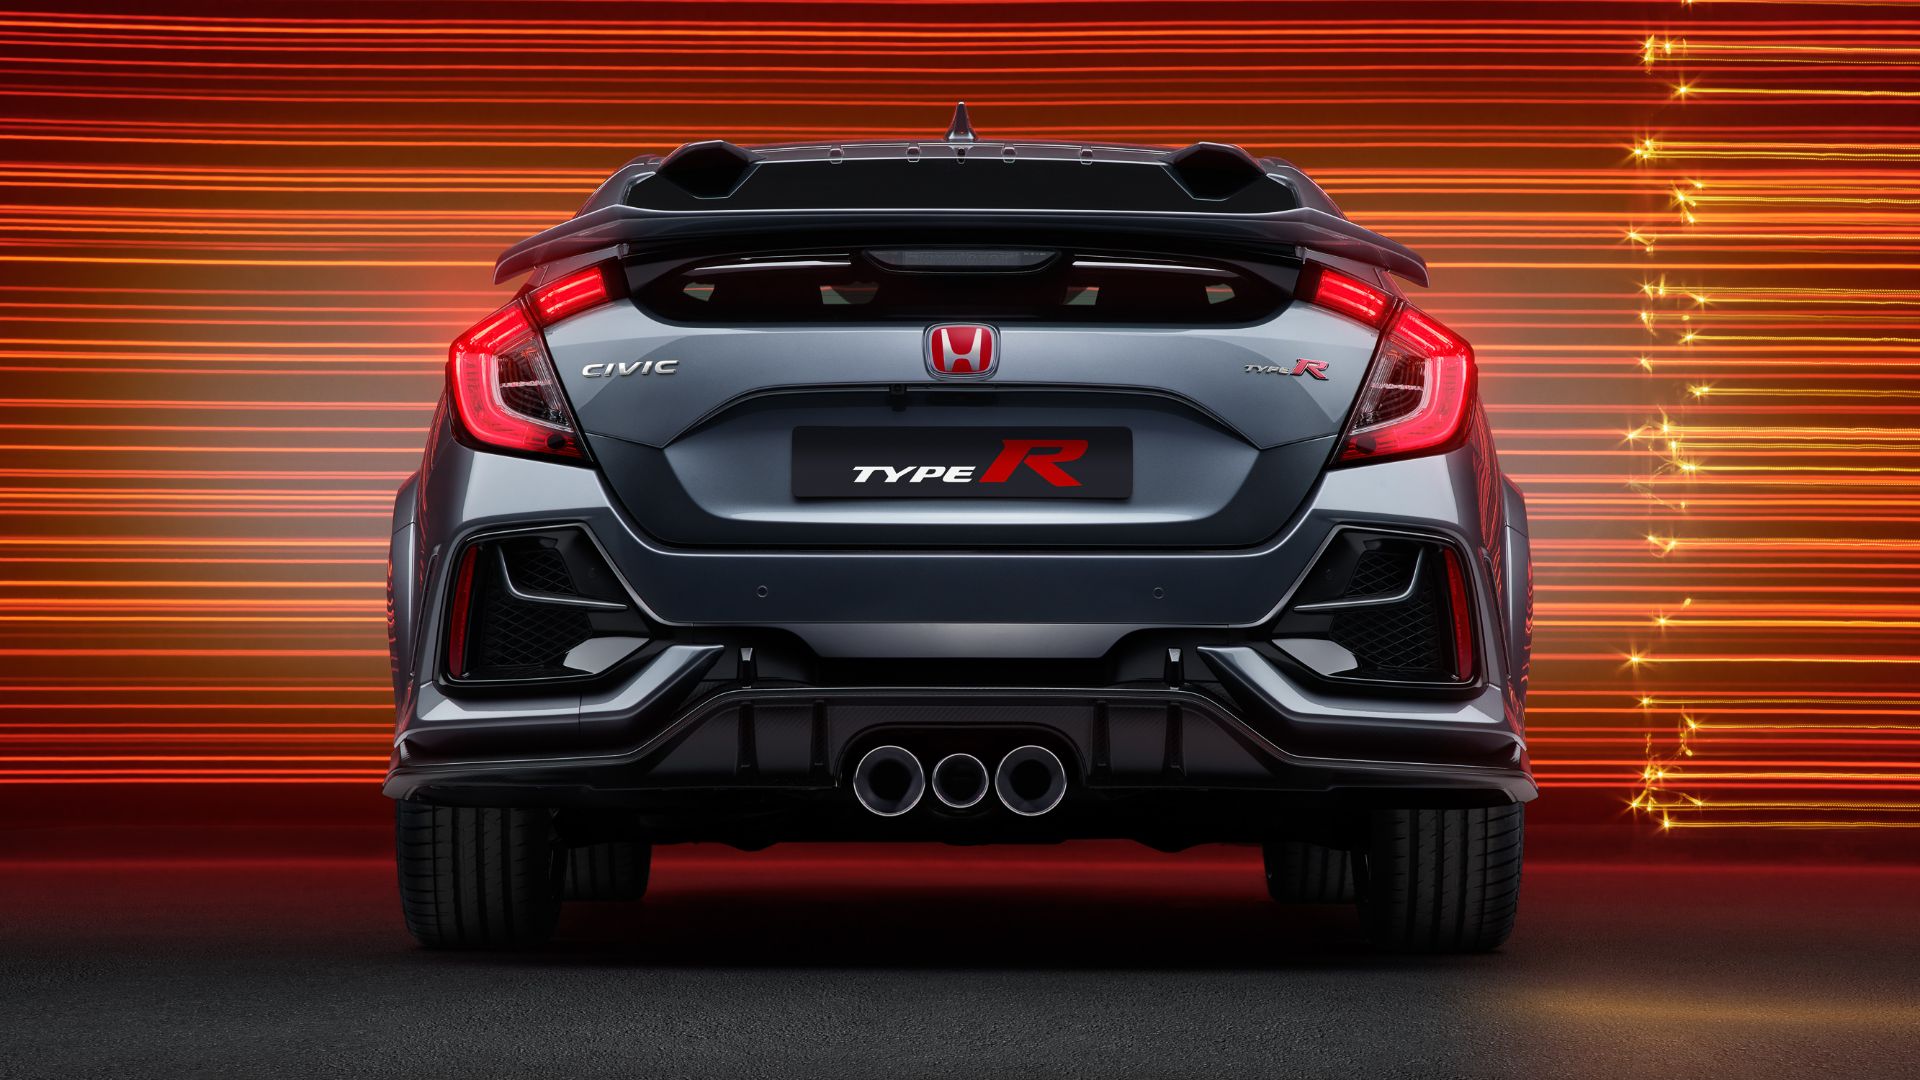 Honda Reveals Civic Type R Including Hardcore Limited Edition